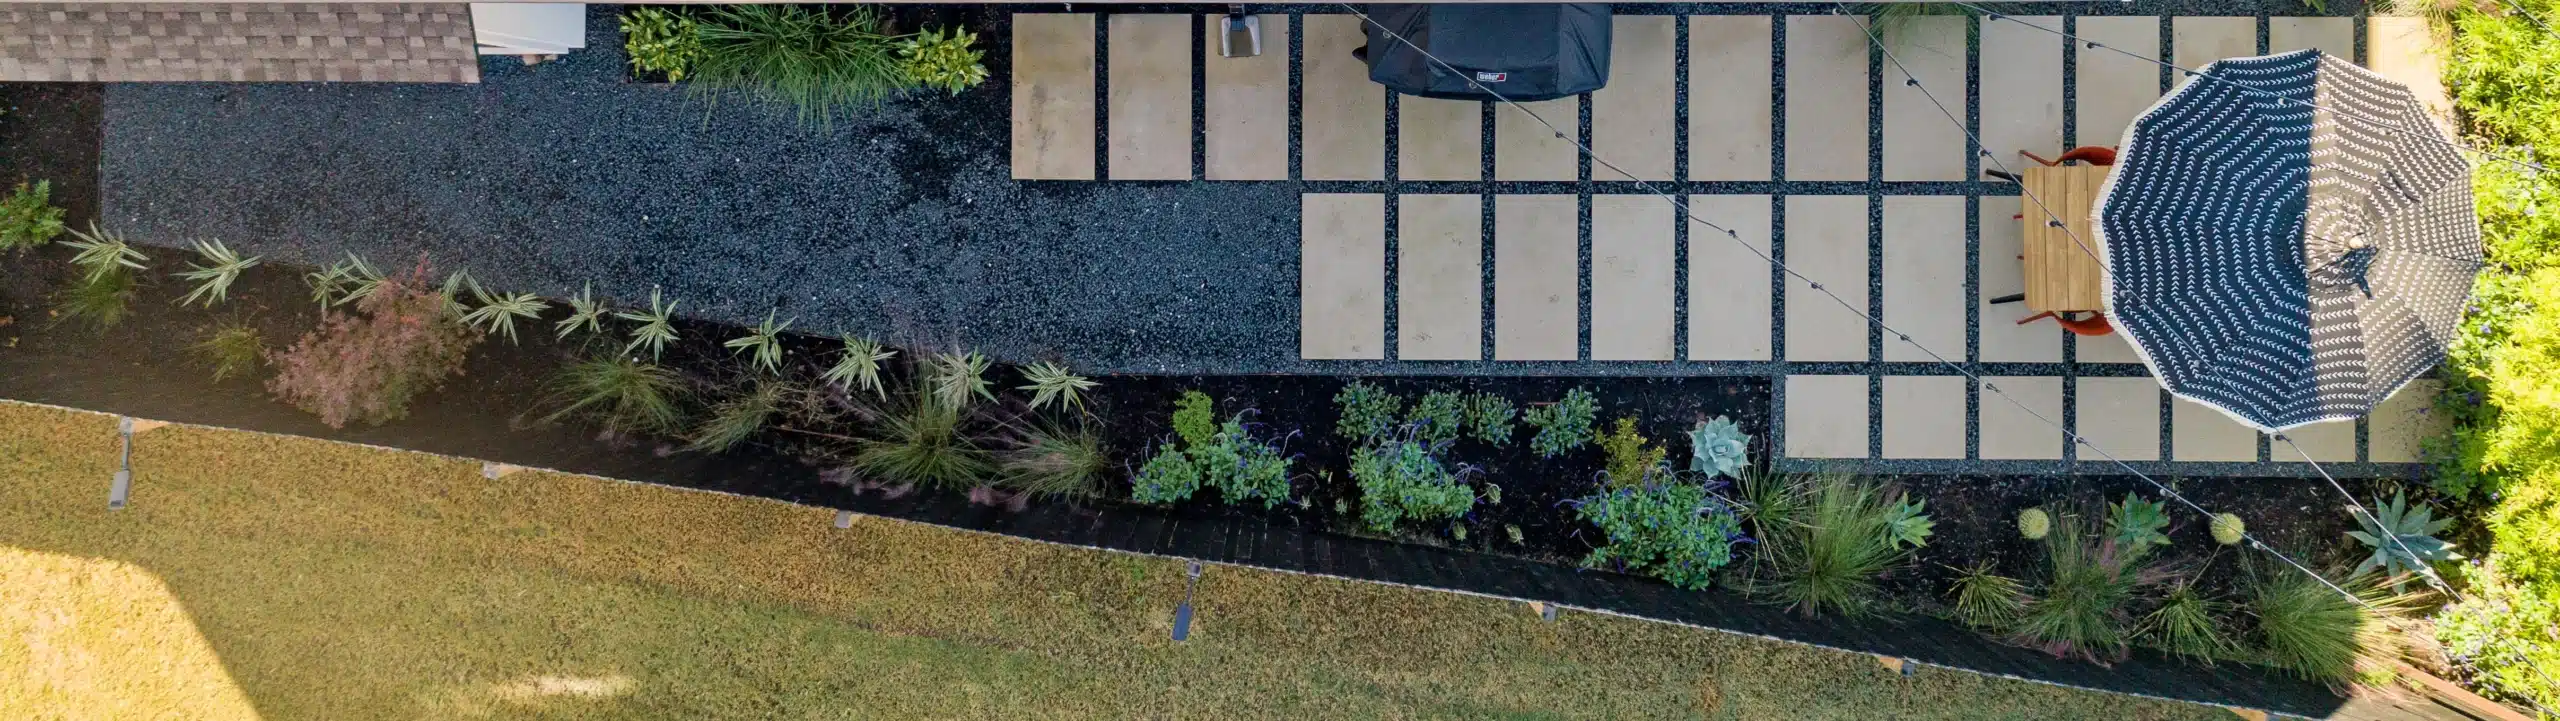 aerial view of large pavers making patio extension with outdoor table and chairs